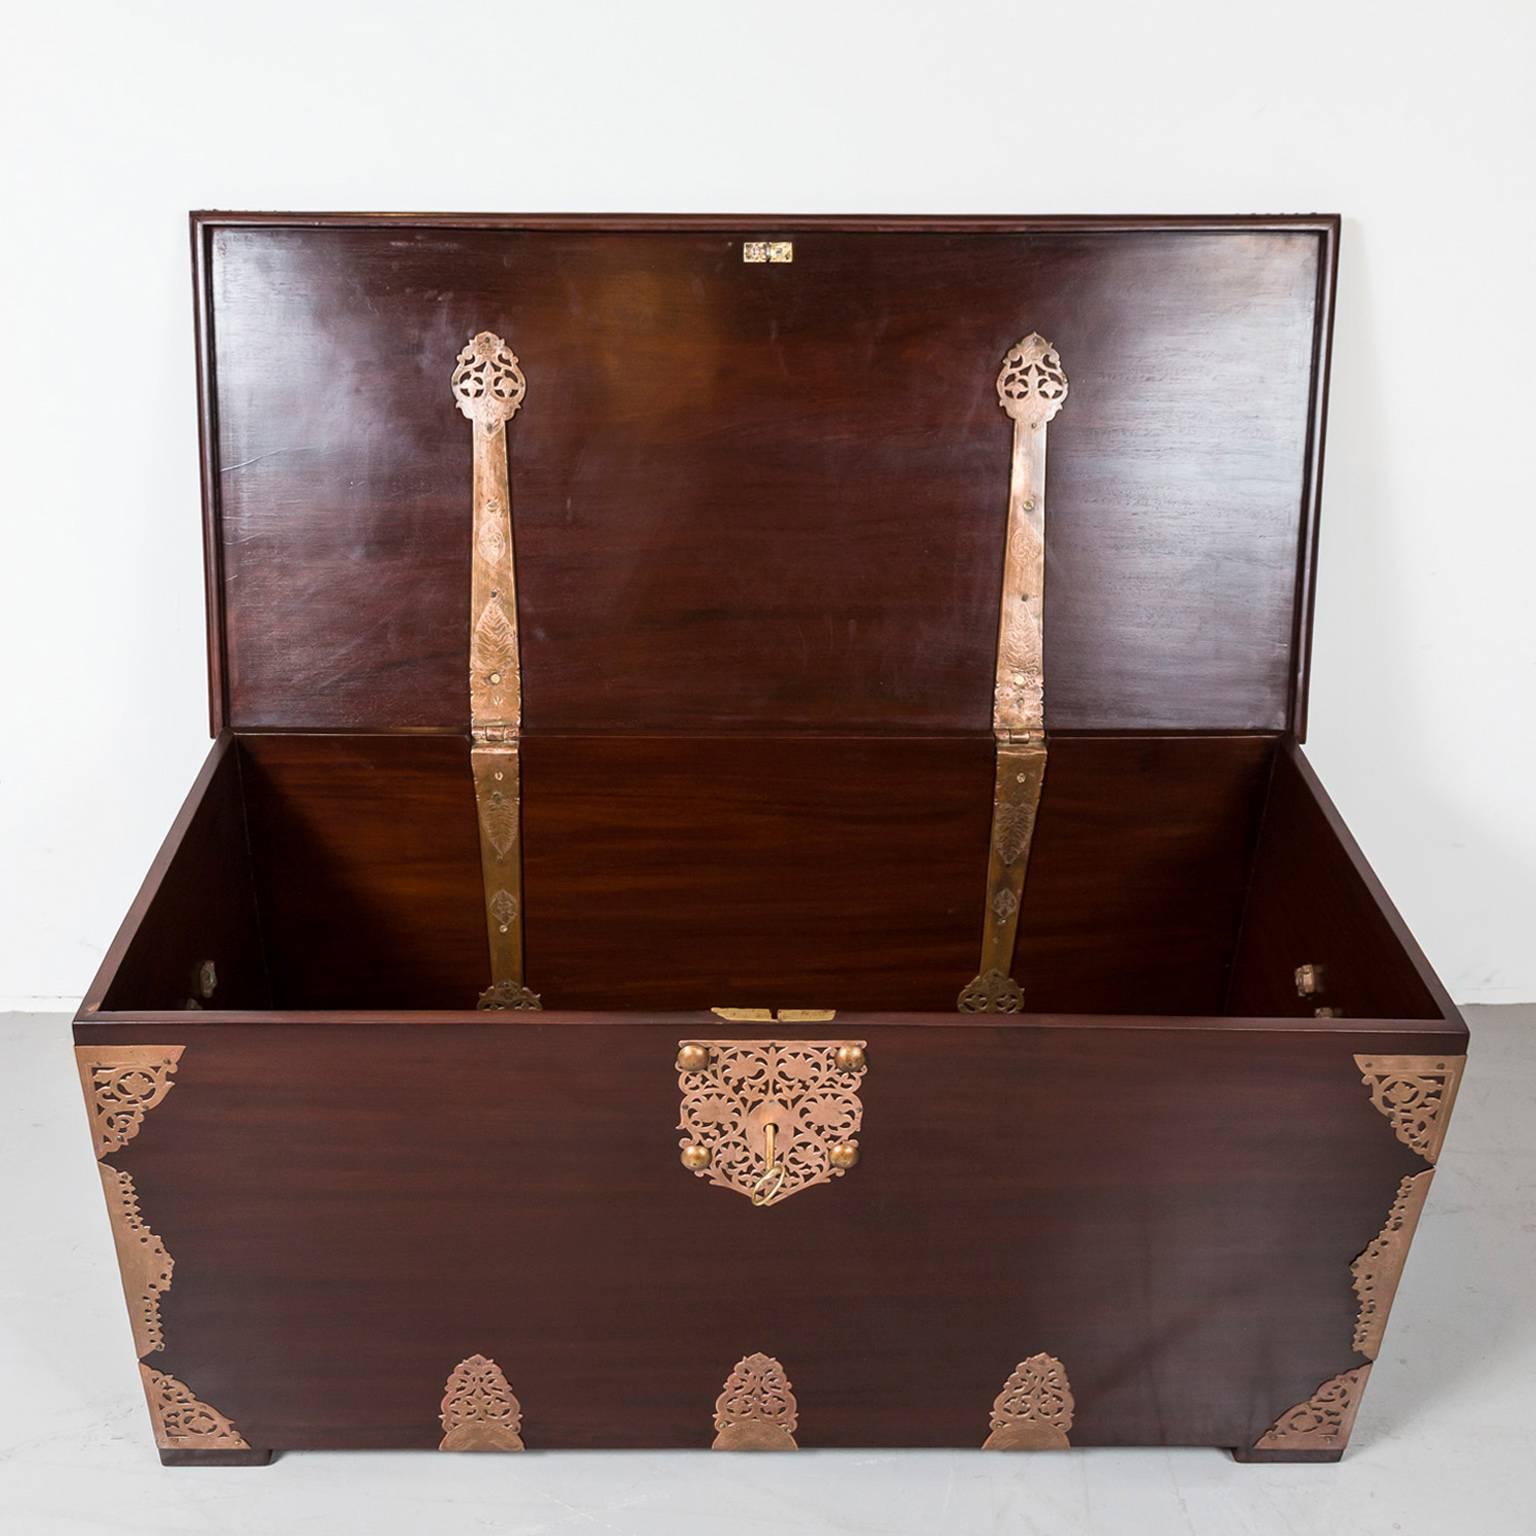 A beautiful Dutch colonial storage chest of solid plank construction in mahogany. It incorporates both Mughal and Dutch influences. 
The chest is strengthened and simultaneously ornamented by open work brass mounts on the sides, corners and bottom.